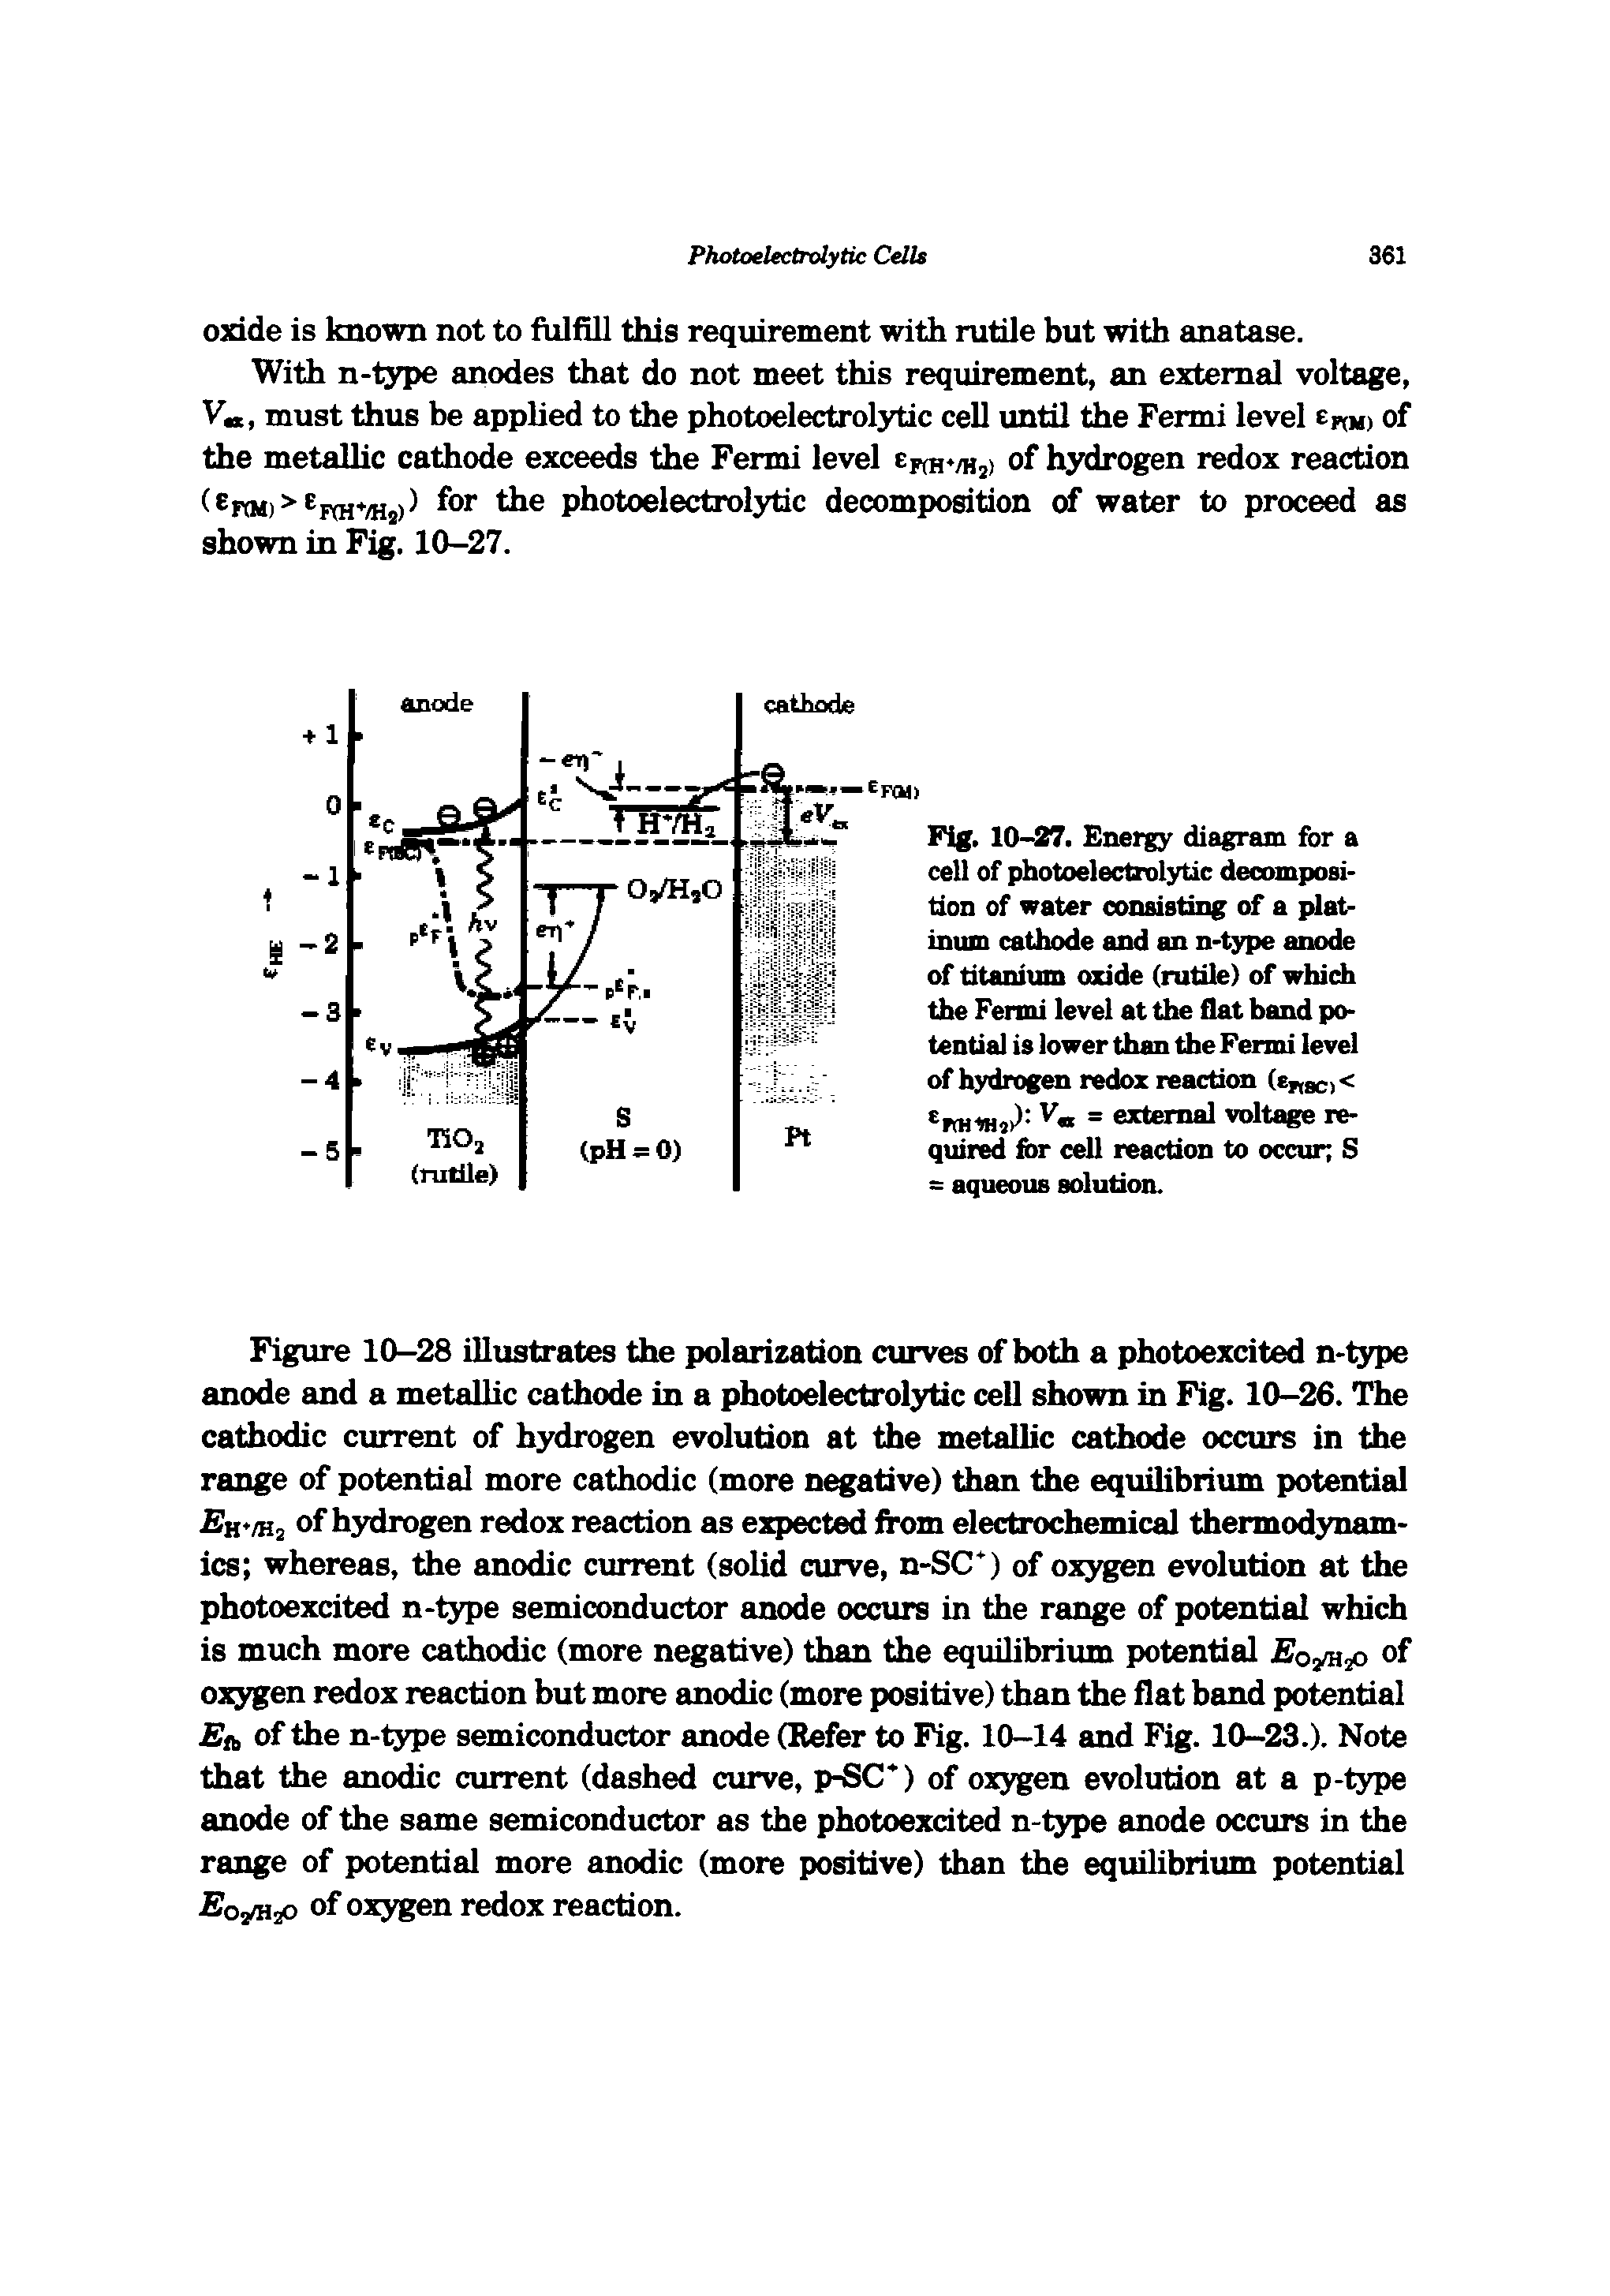 Fig. 10-27. Energy diagram for a cell of photoelectrolytic decomposition of water consisting of a platinum cathode and an n-type anode of titanium oxide (rutile) of which the Fermi level at the flat band potential is lower than the Fermi level of hydrogen redox reaction (ensc>< = external voltage required for cell reaction to occur S = aqueous solution.